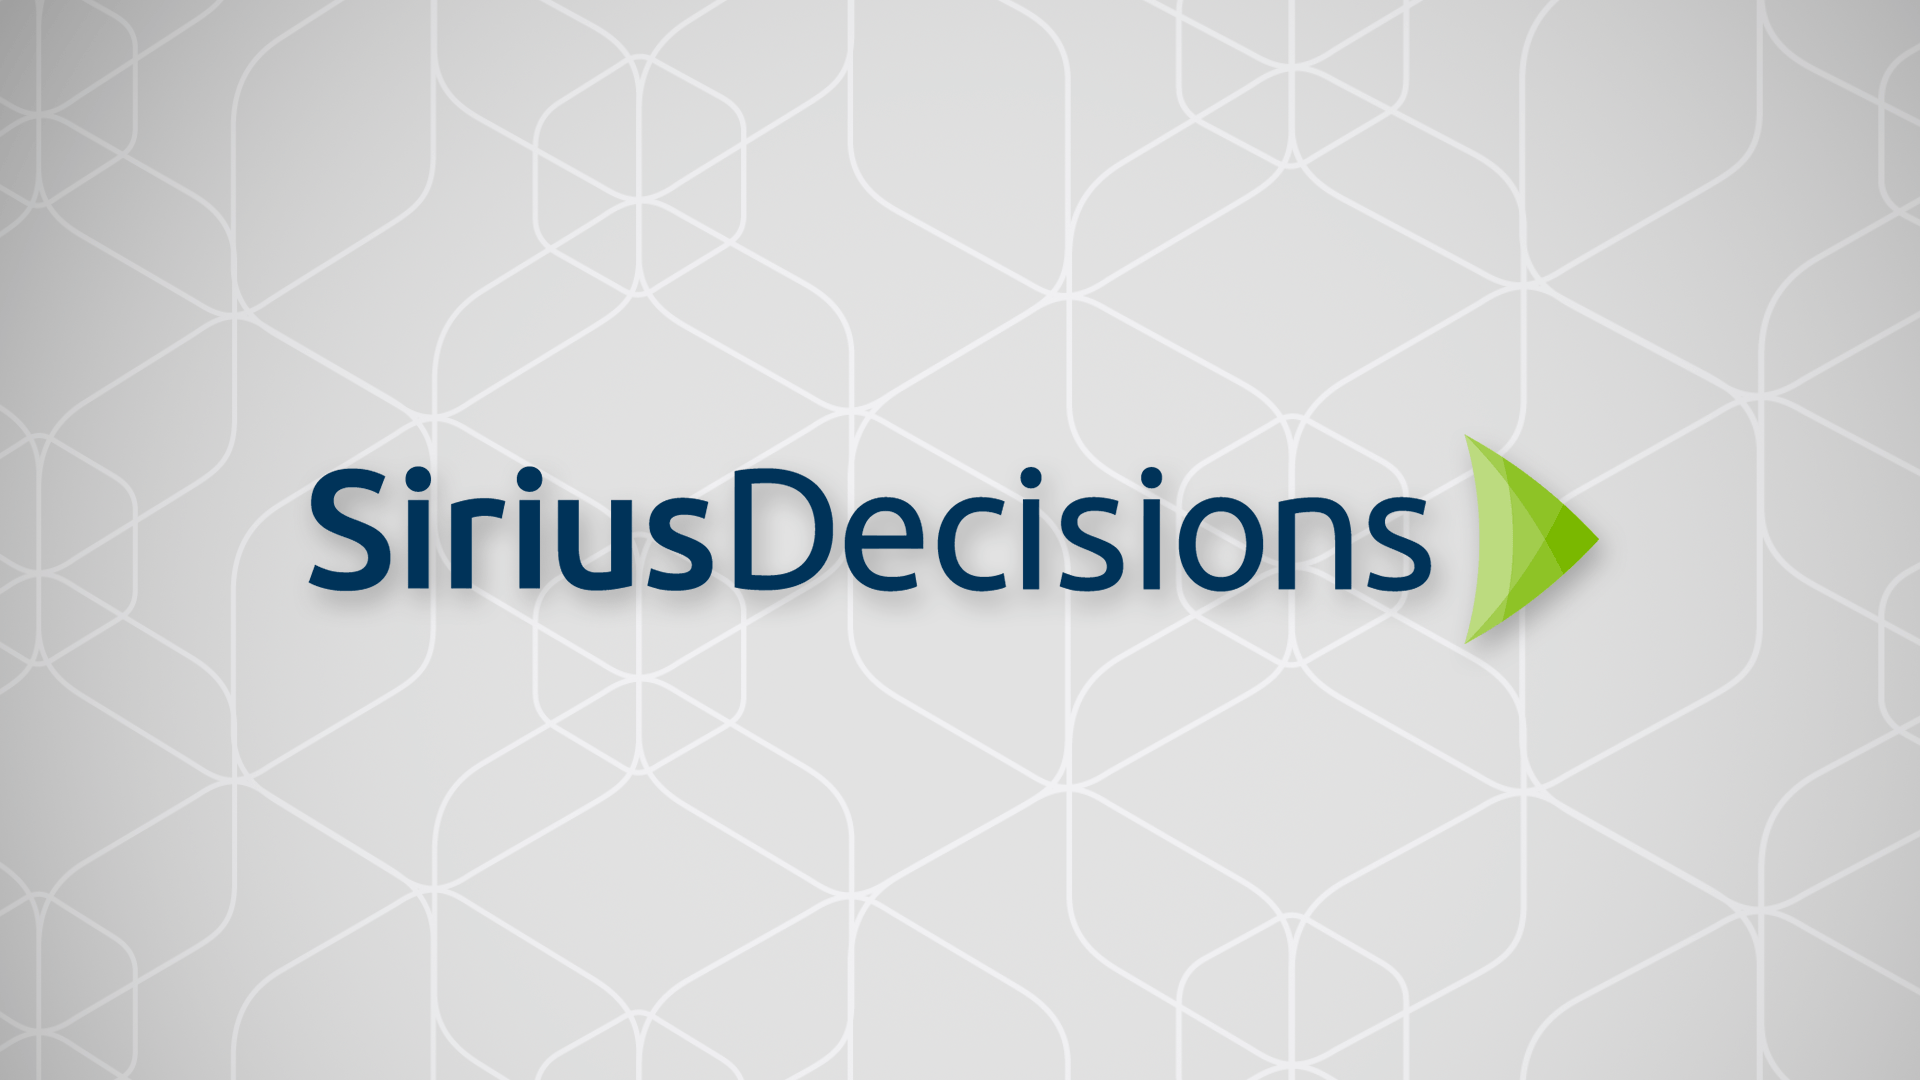 sirius decisions event band 2016